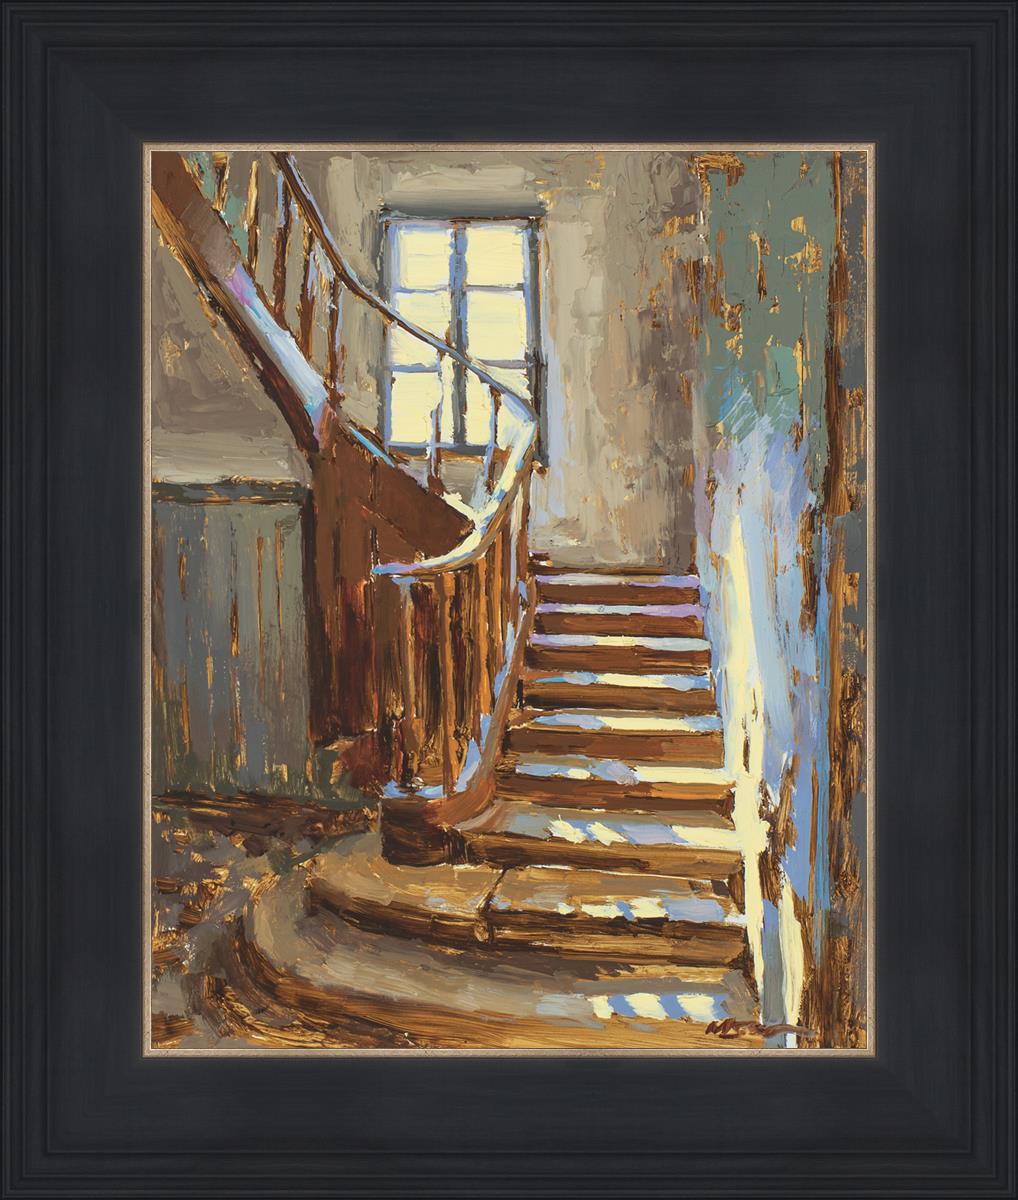 The Winding Ancient Stair